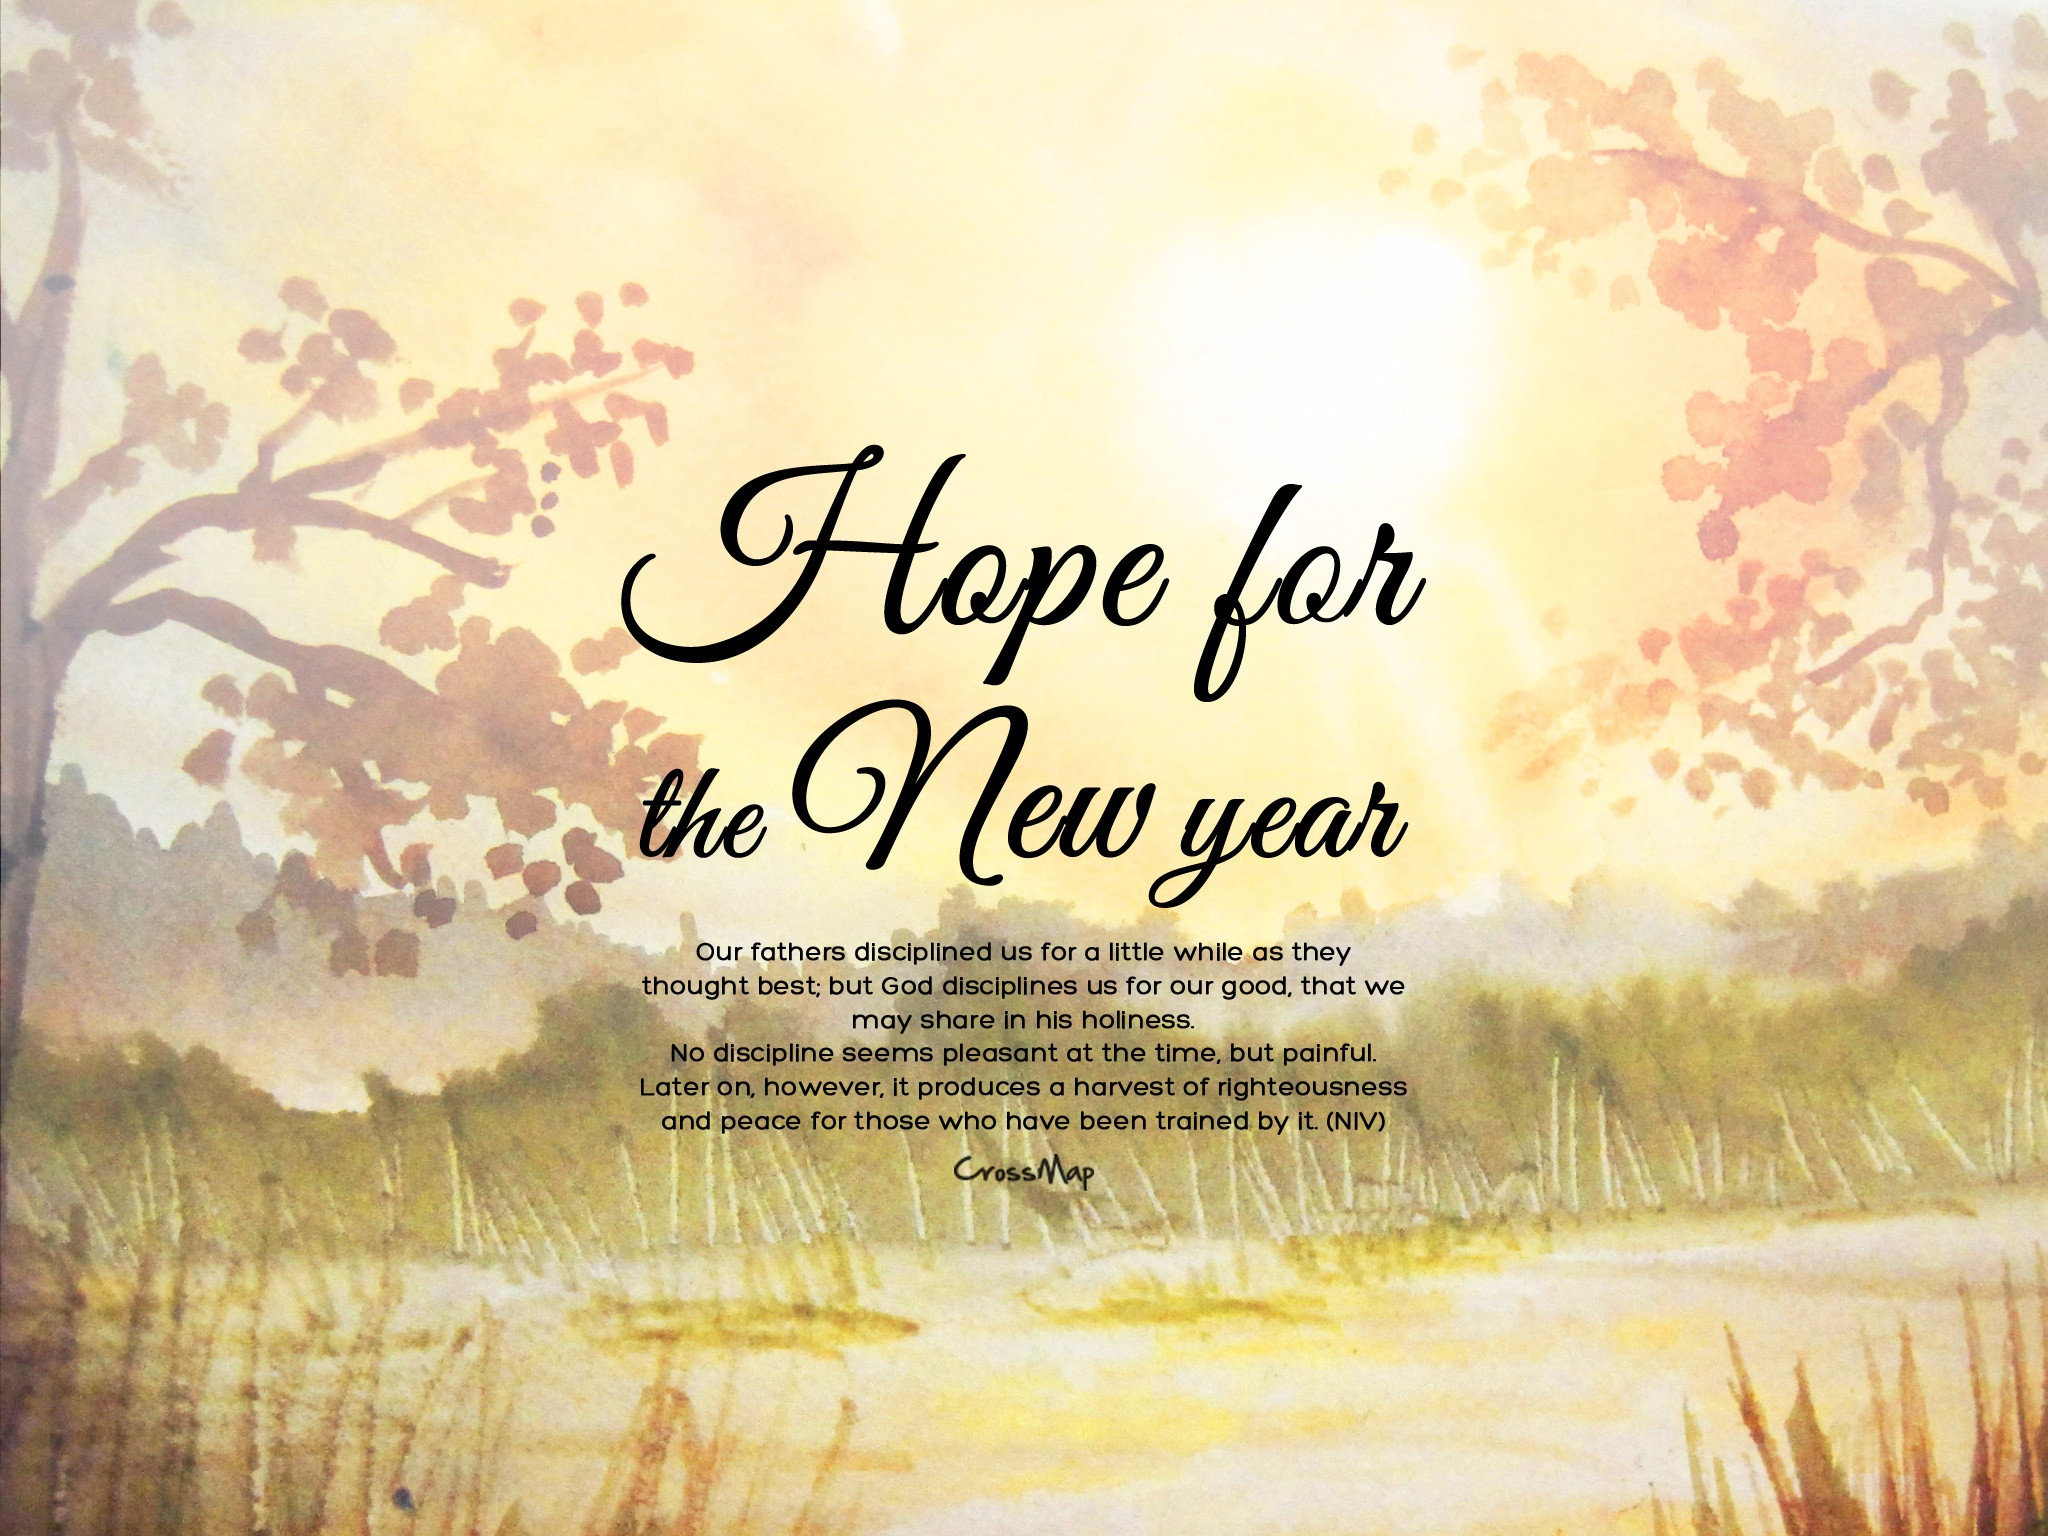 New Year Christian Quote
 Christian New Year Quotes 2019 Download Daily SMS